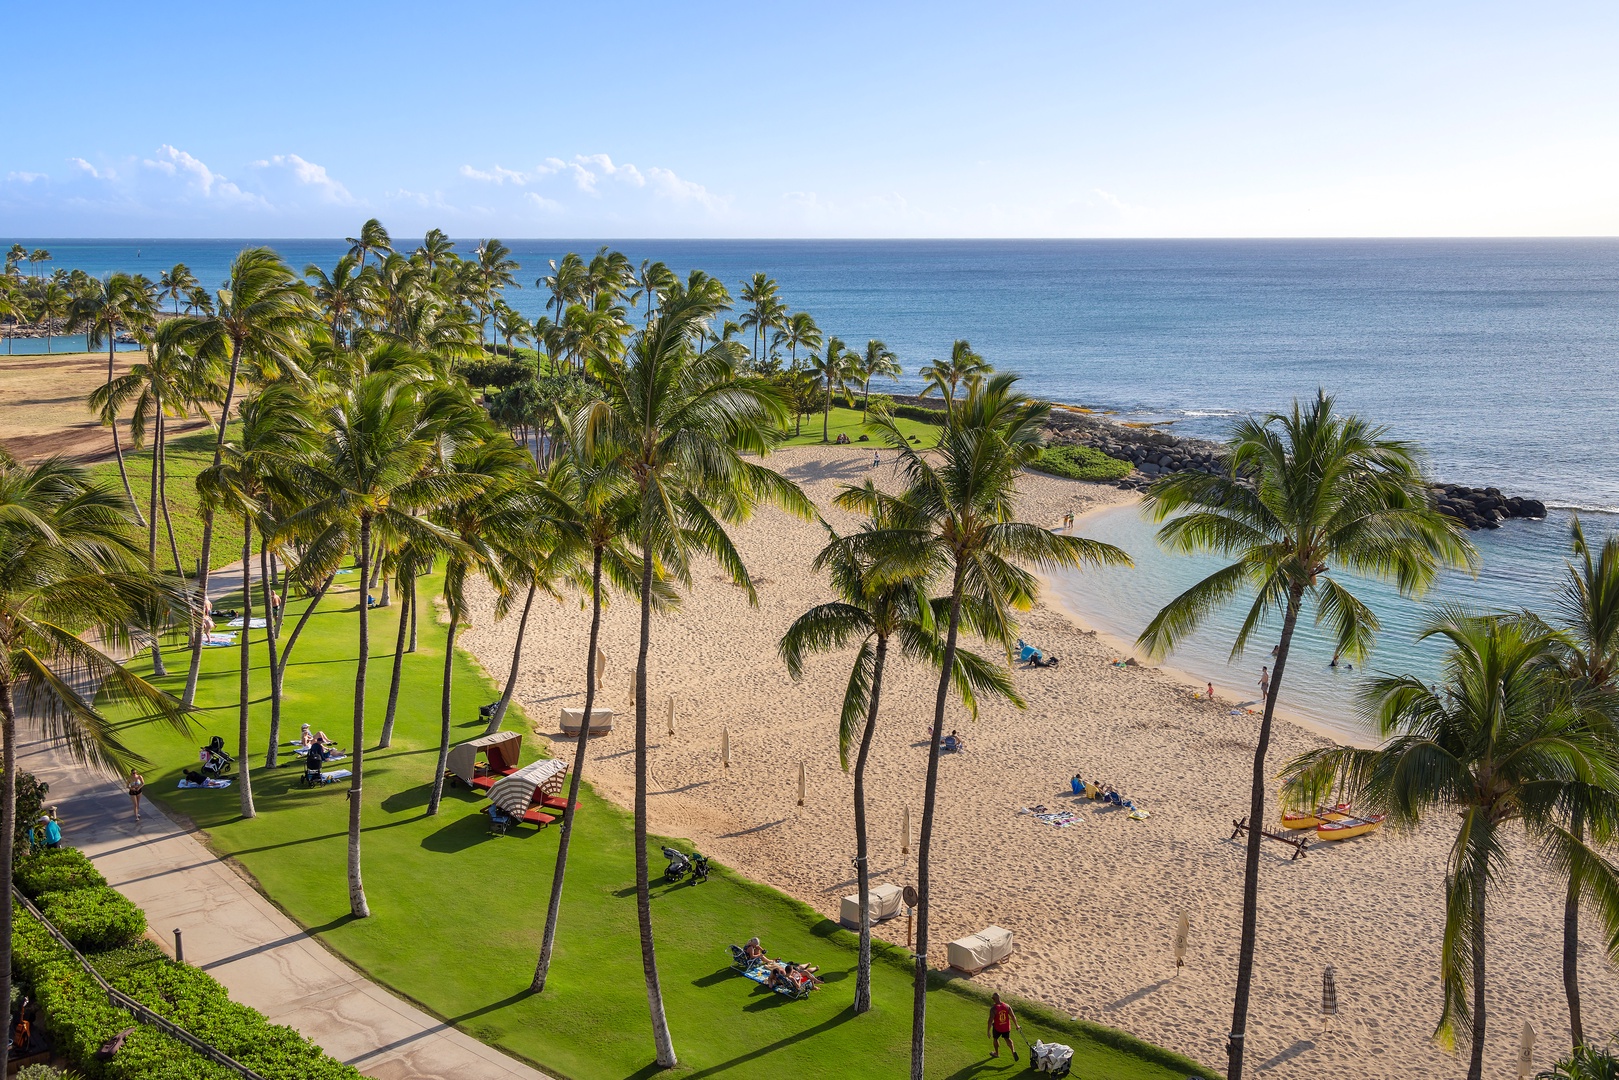 Kapolei Vacation Rentals, Ko Olina Beach Villas B610 - The lagoon is the perfect spot to relax under the trees and enjoy the beach.